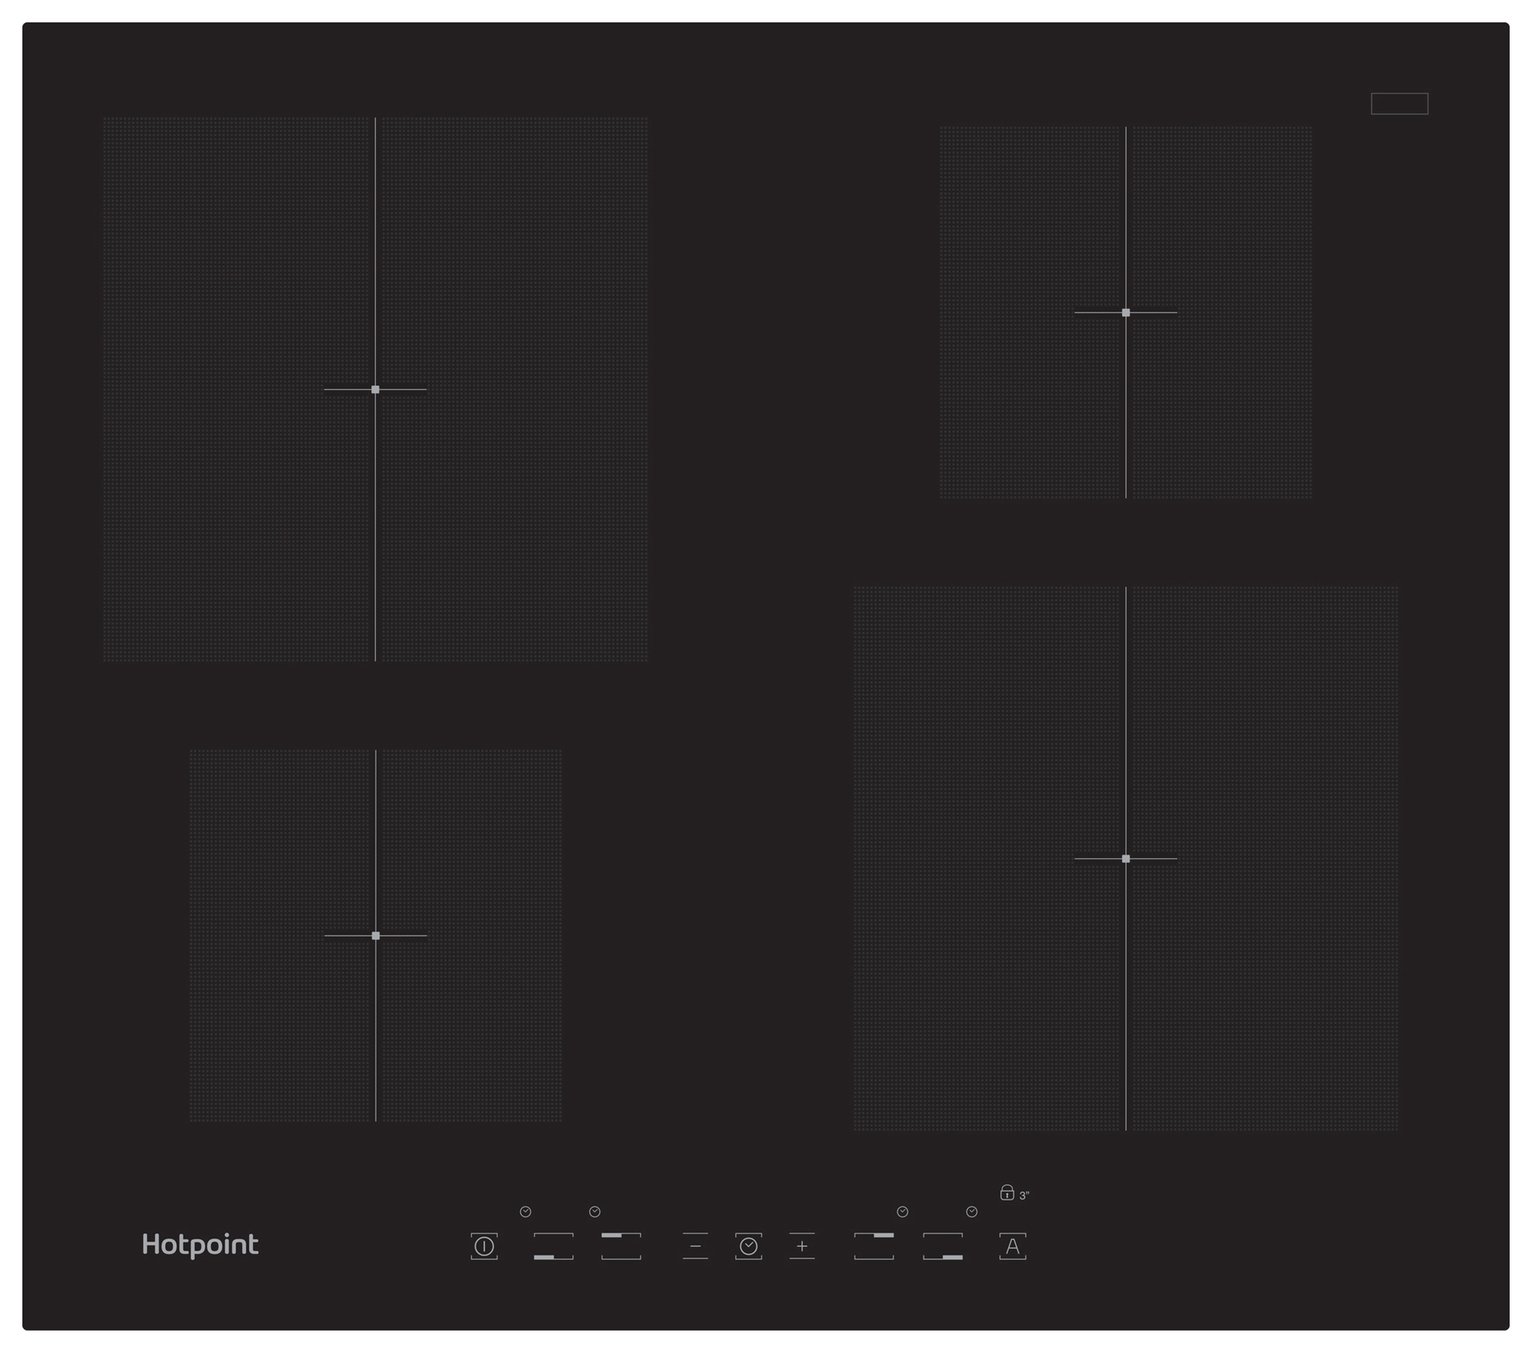 Hotpoint CIA640C Induction Hob review